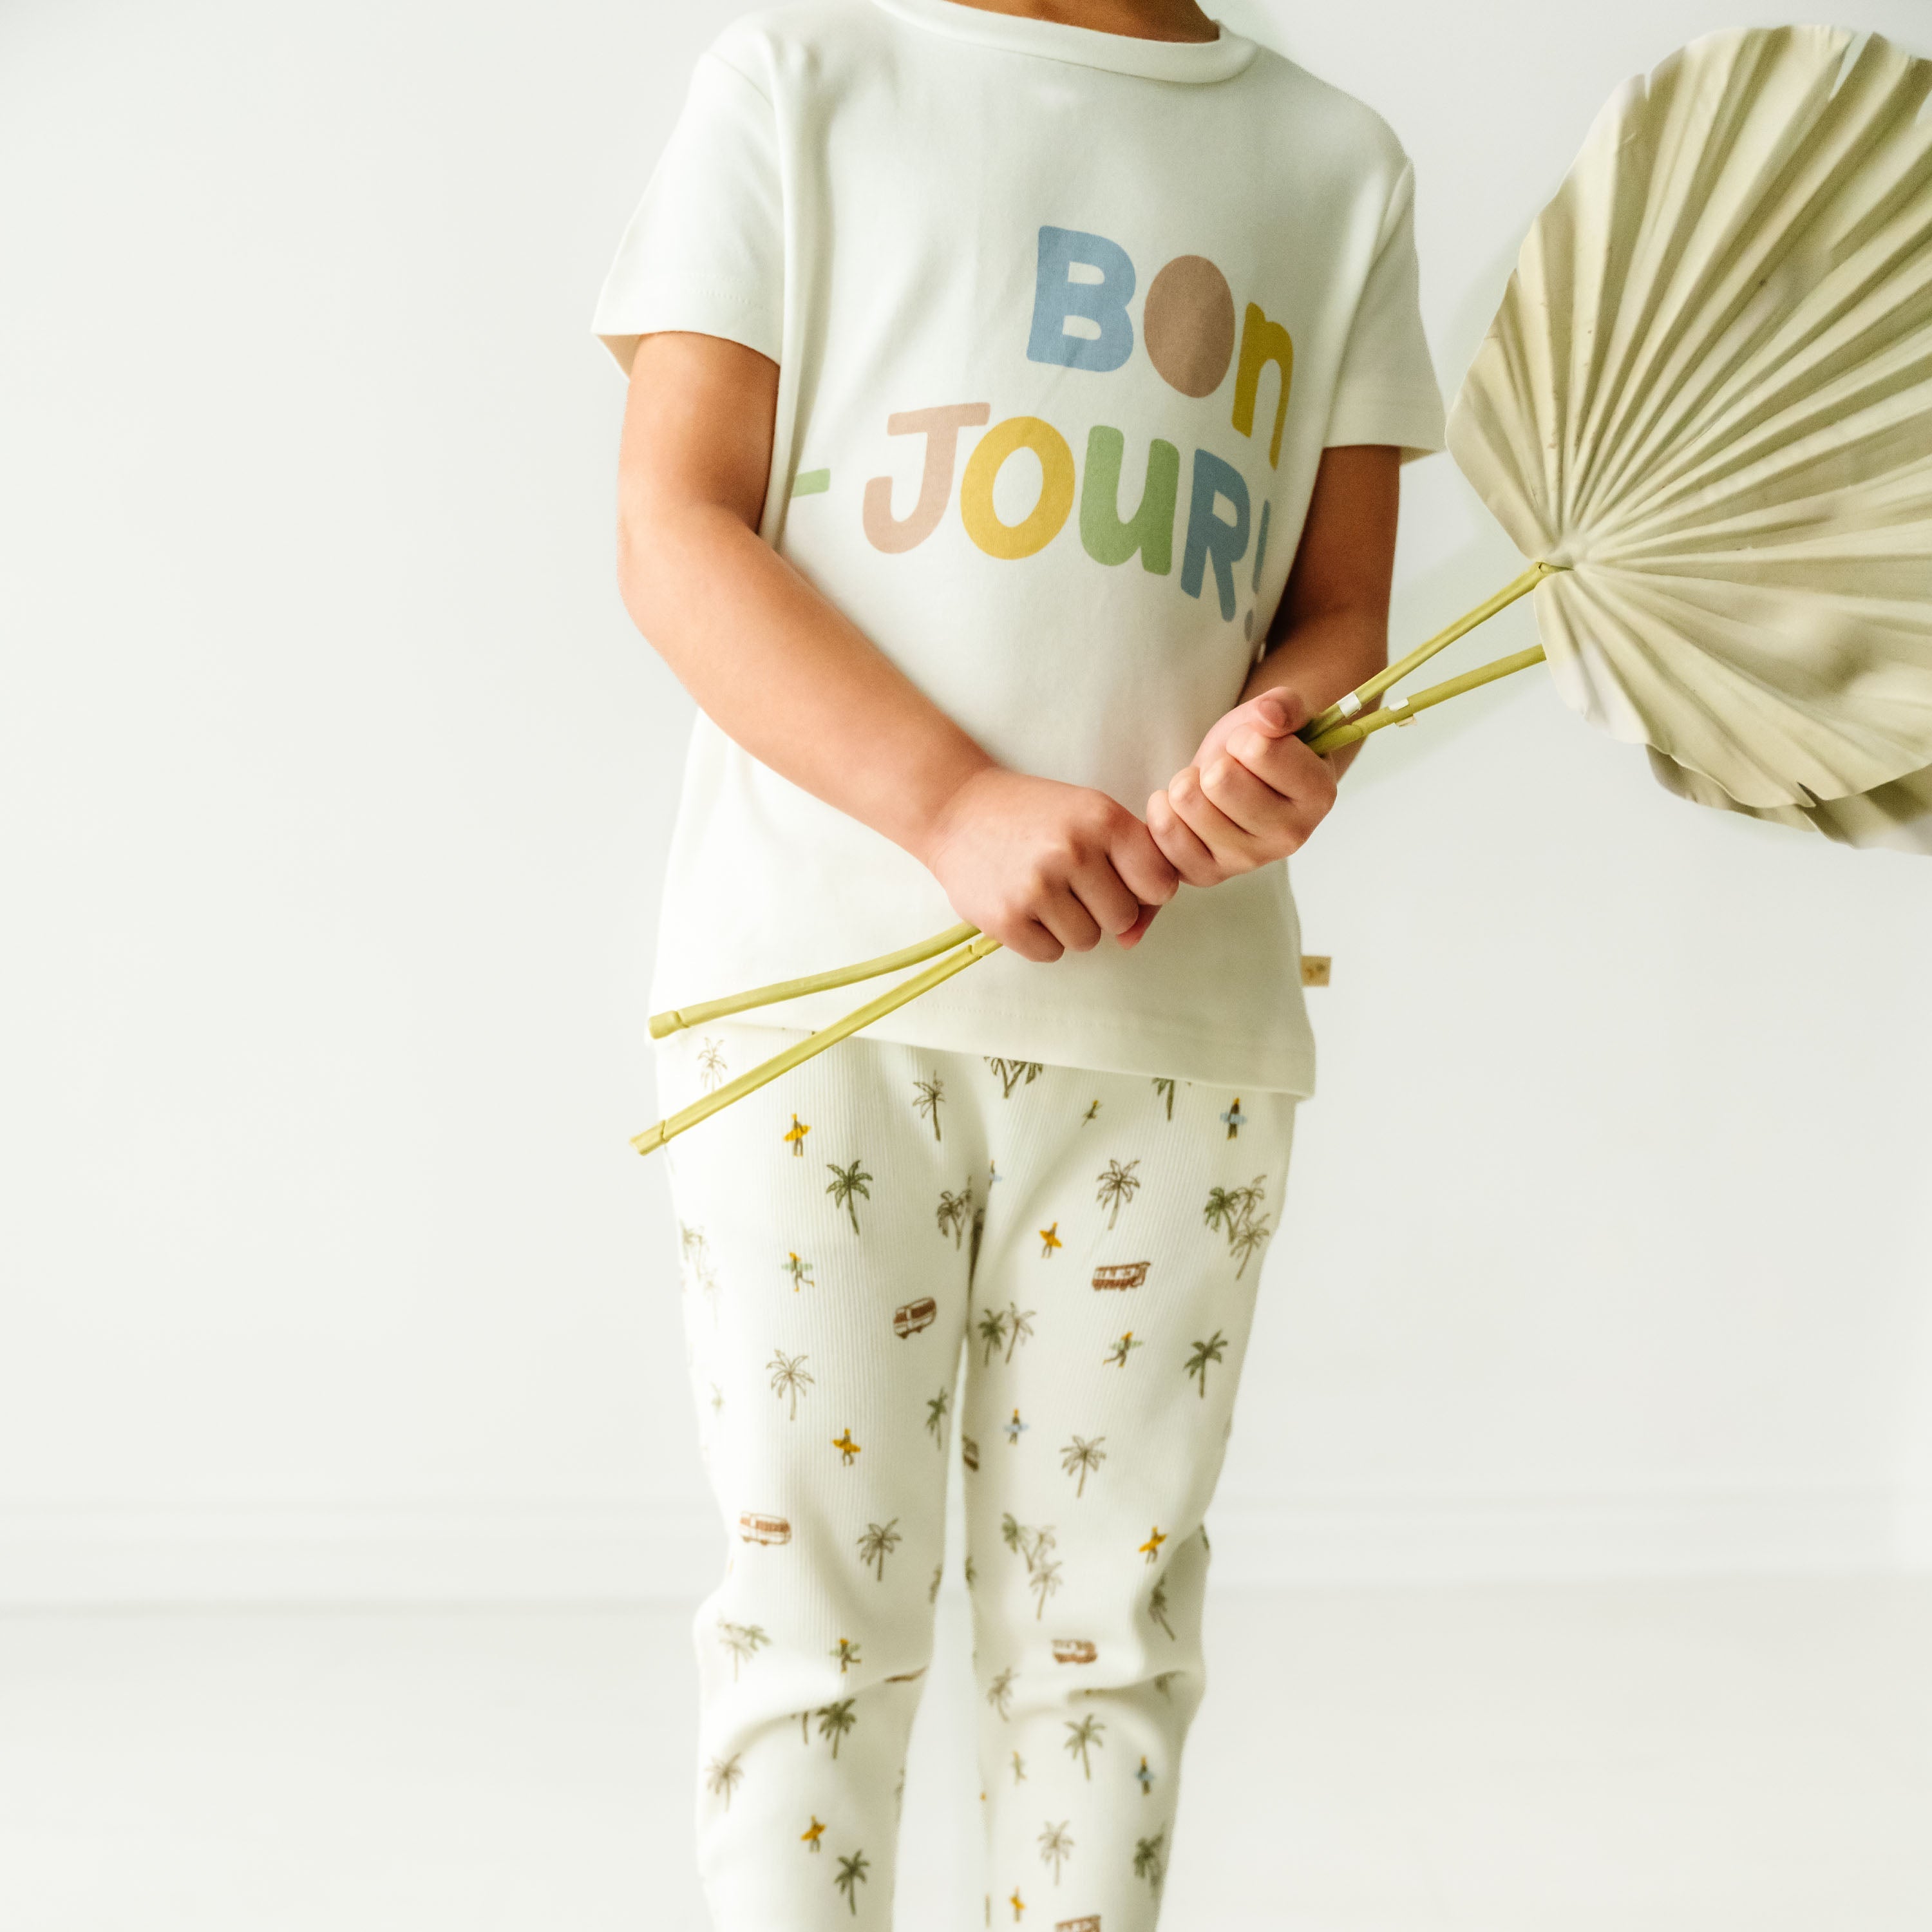 A toddler in pale pajamas printed with icons and the phrase "bon jour" on the shirt, holding a folded light-colored umbrella, standing against a white background in Makemake Organics' Organic Crew Neck Tee - Bonjour.